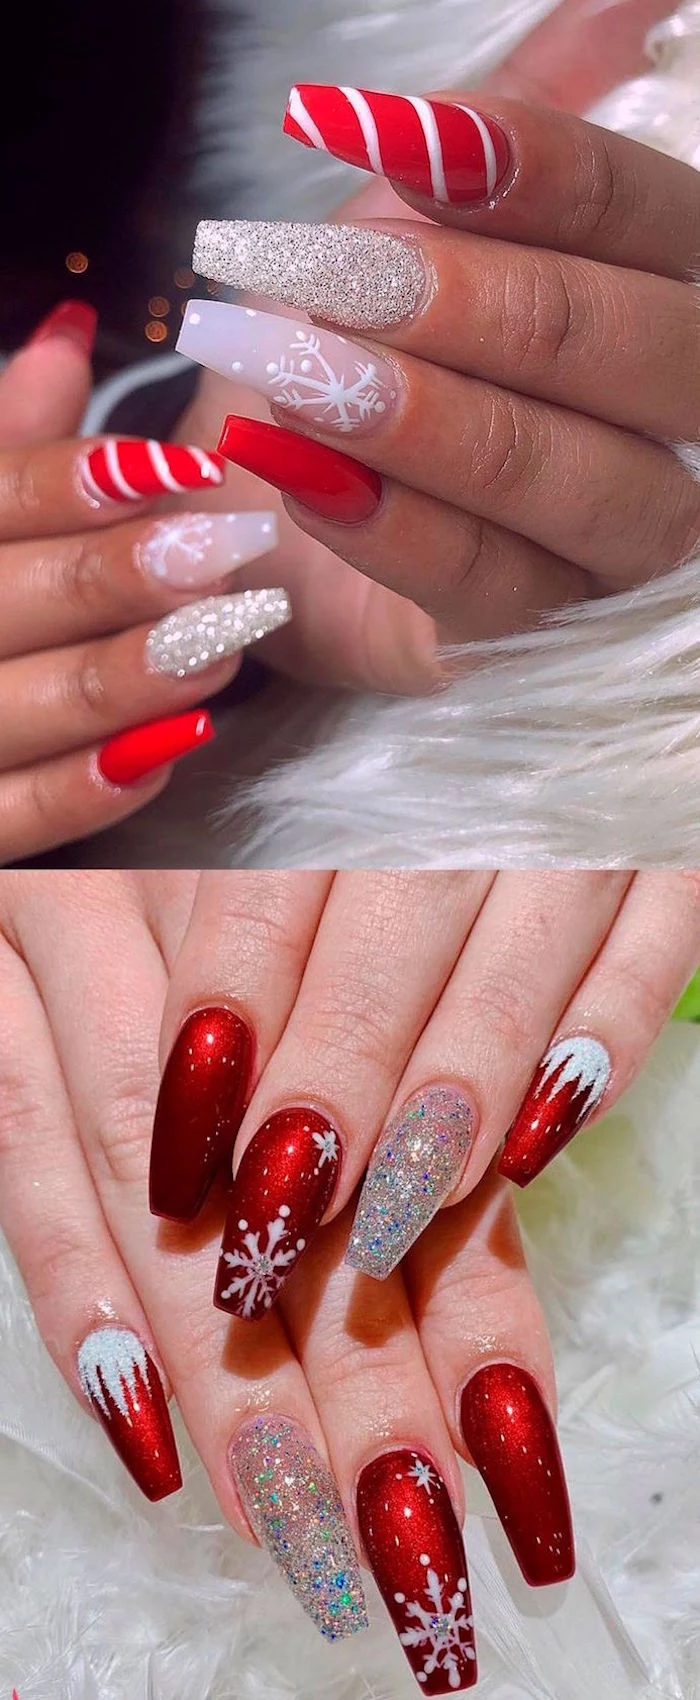 christmas nails two photos of long coffin nails in red and silver glitter with snowflake decorations